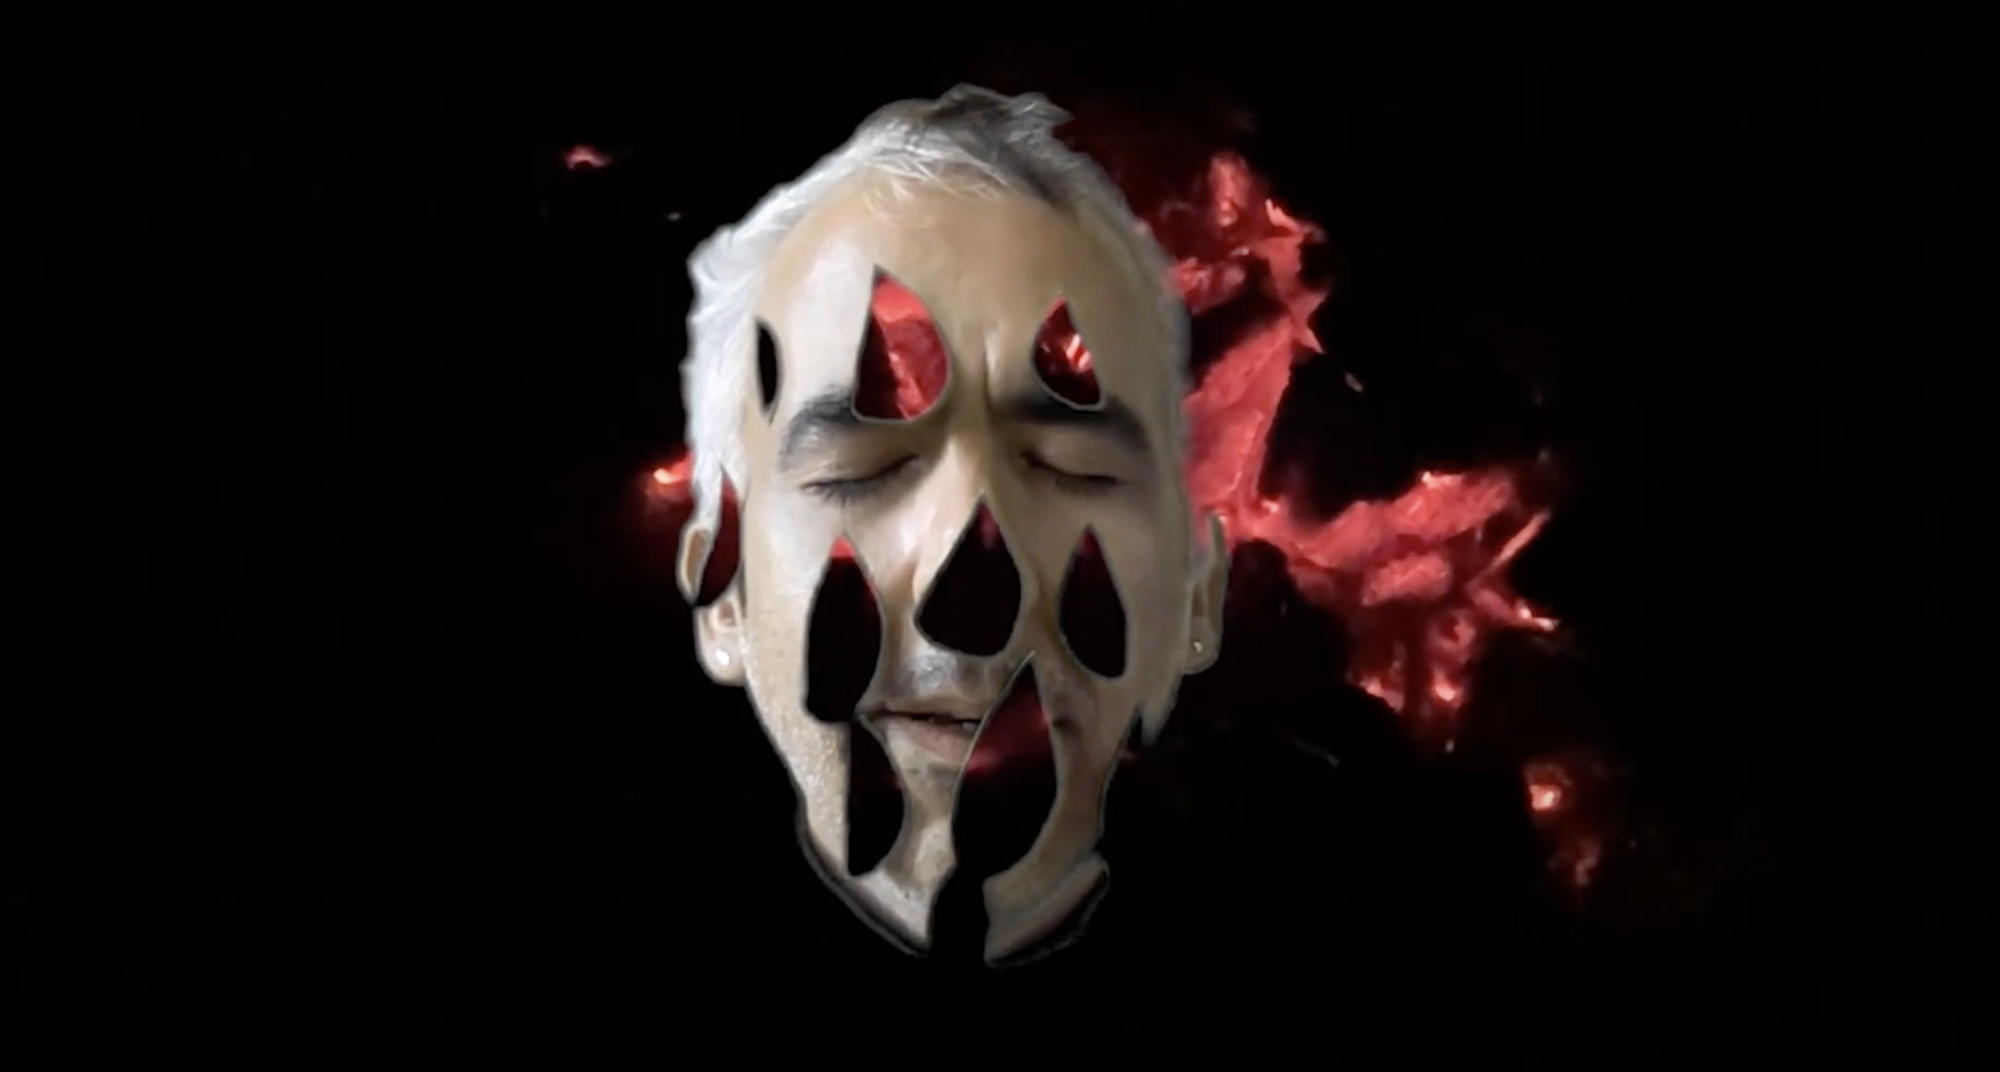 Peter's face appears floating on a black screen, his eyes are closed, and there are teardrop shaped cut outs on his skin that show the black and flaming background behind him